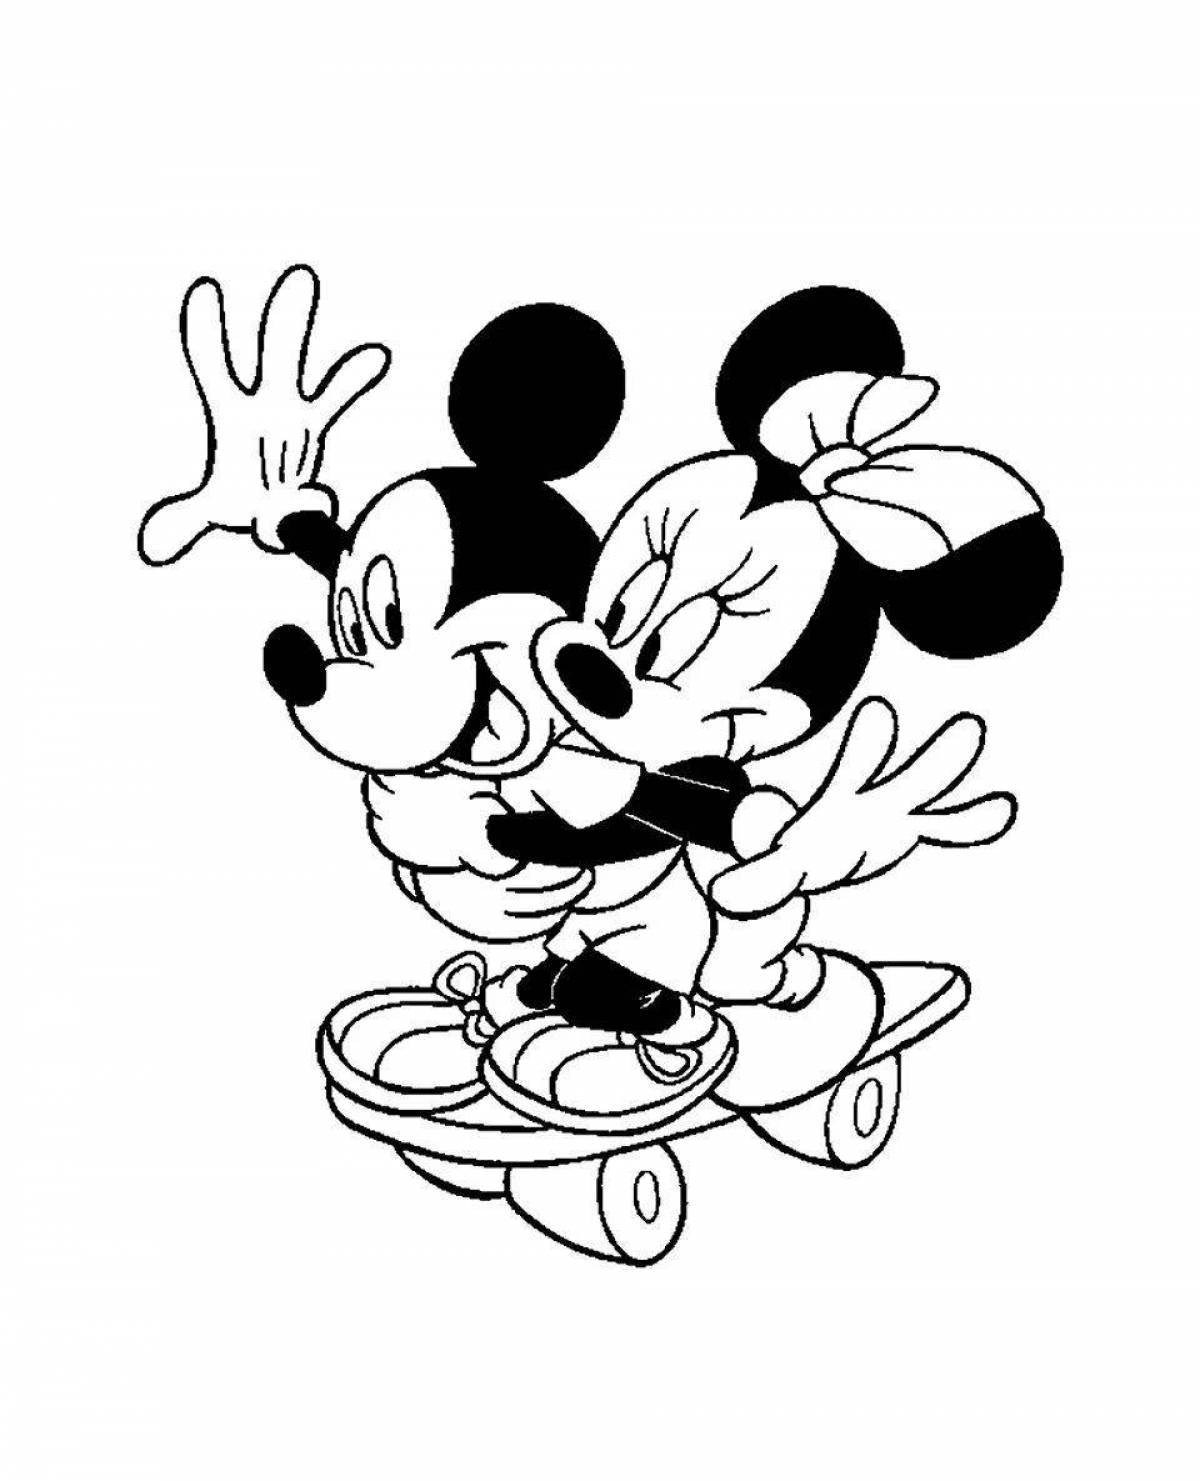 Coloring cute minnie mouse